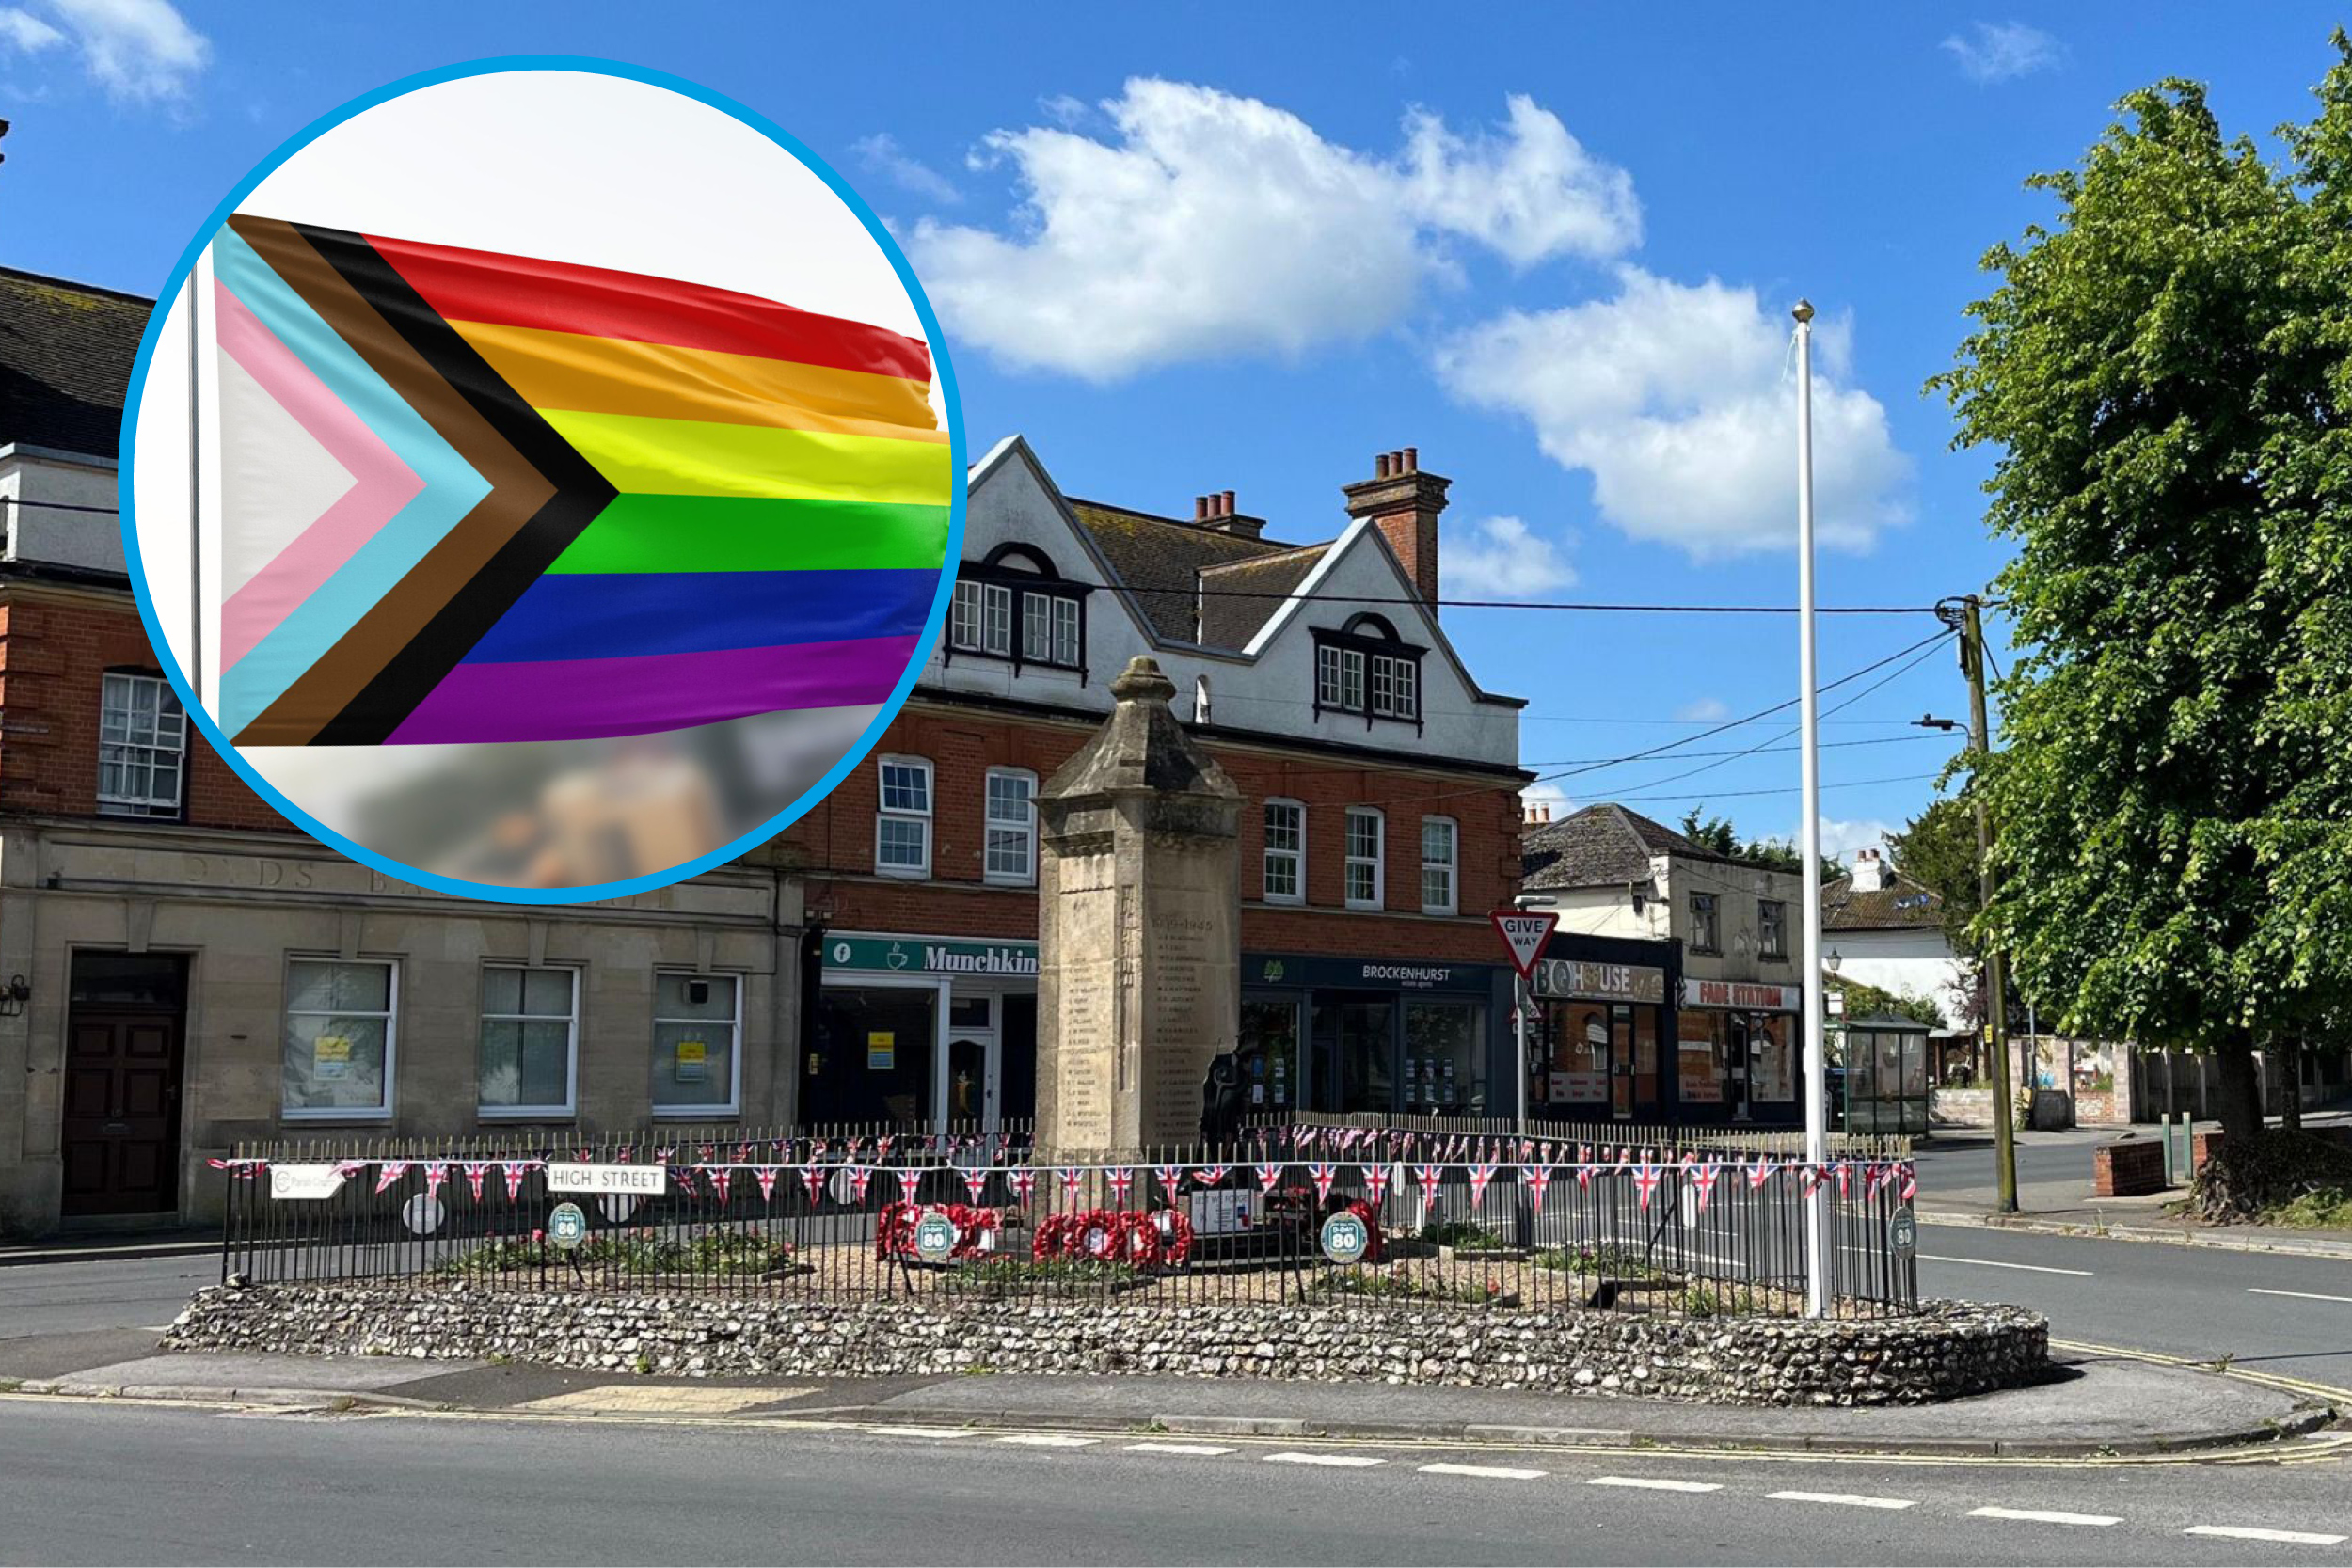 Progress flag raised in Wiltshire town to mark Pride Month torn down in what is being called a “hate crime”